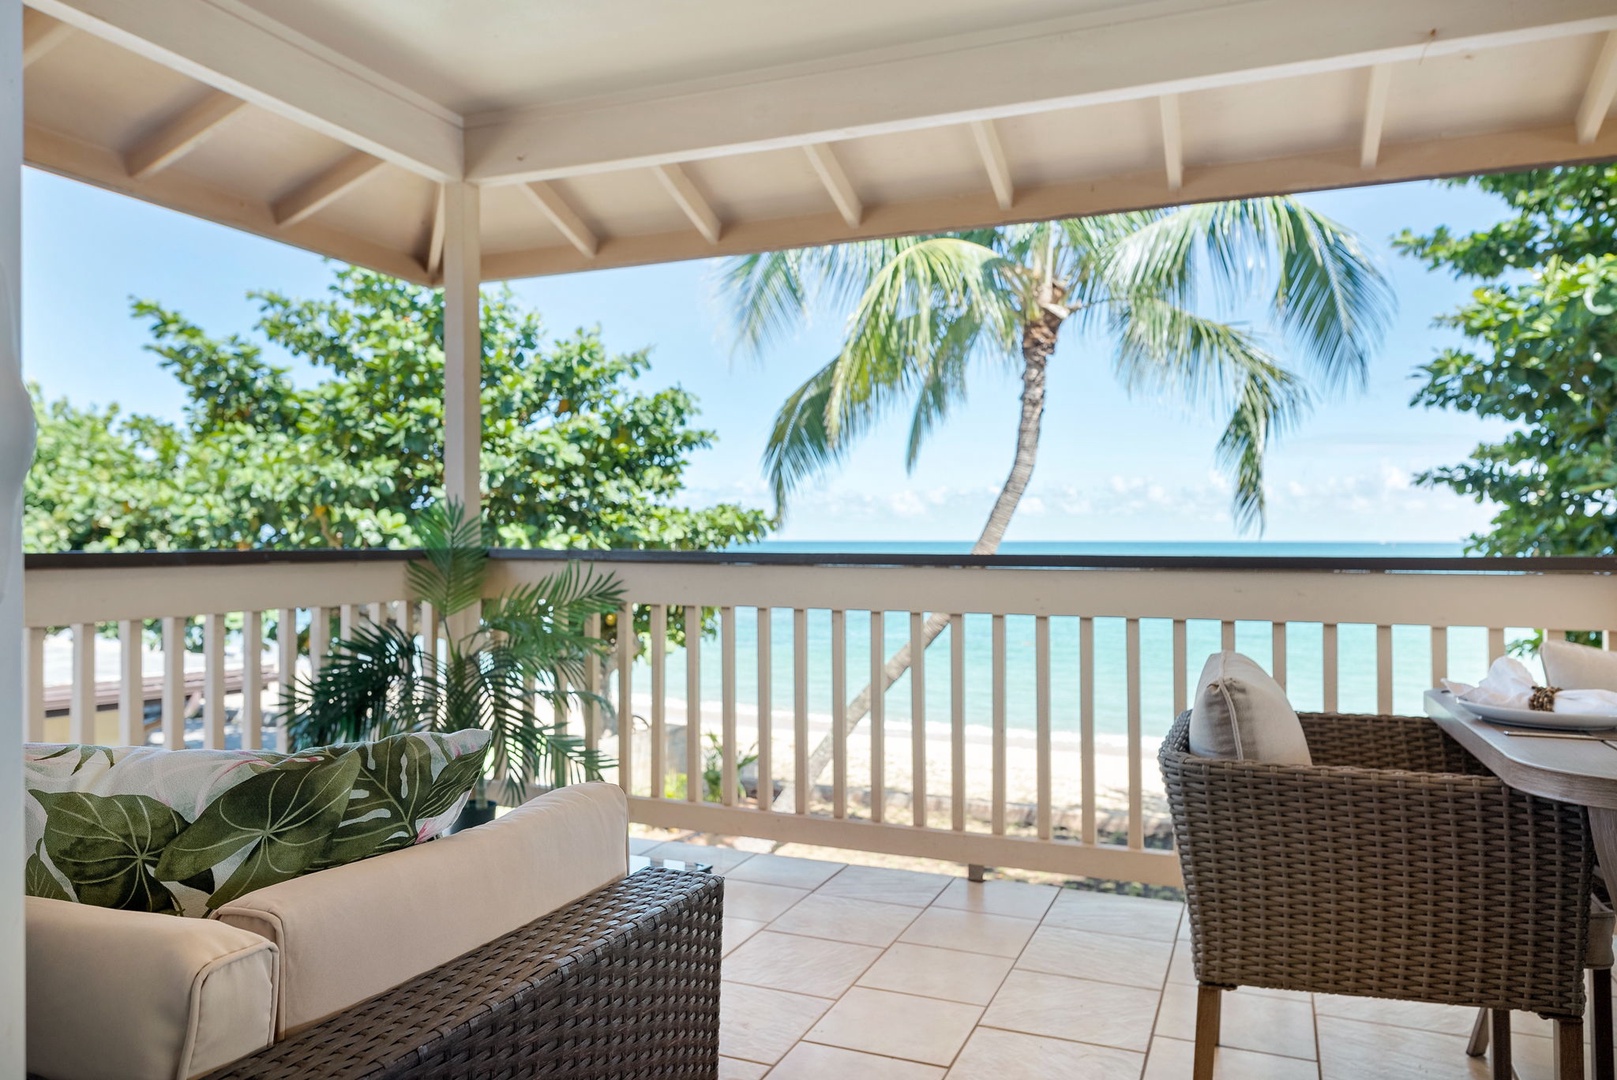 Haleiwa Vacation Rentals, Pikai Hale - Step out through the sliding doors to your private lanai, complete with outdoor seating and dining